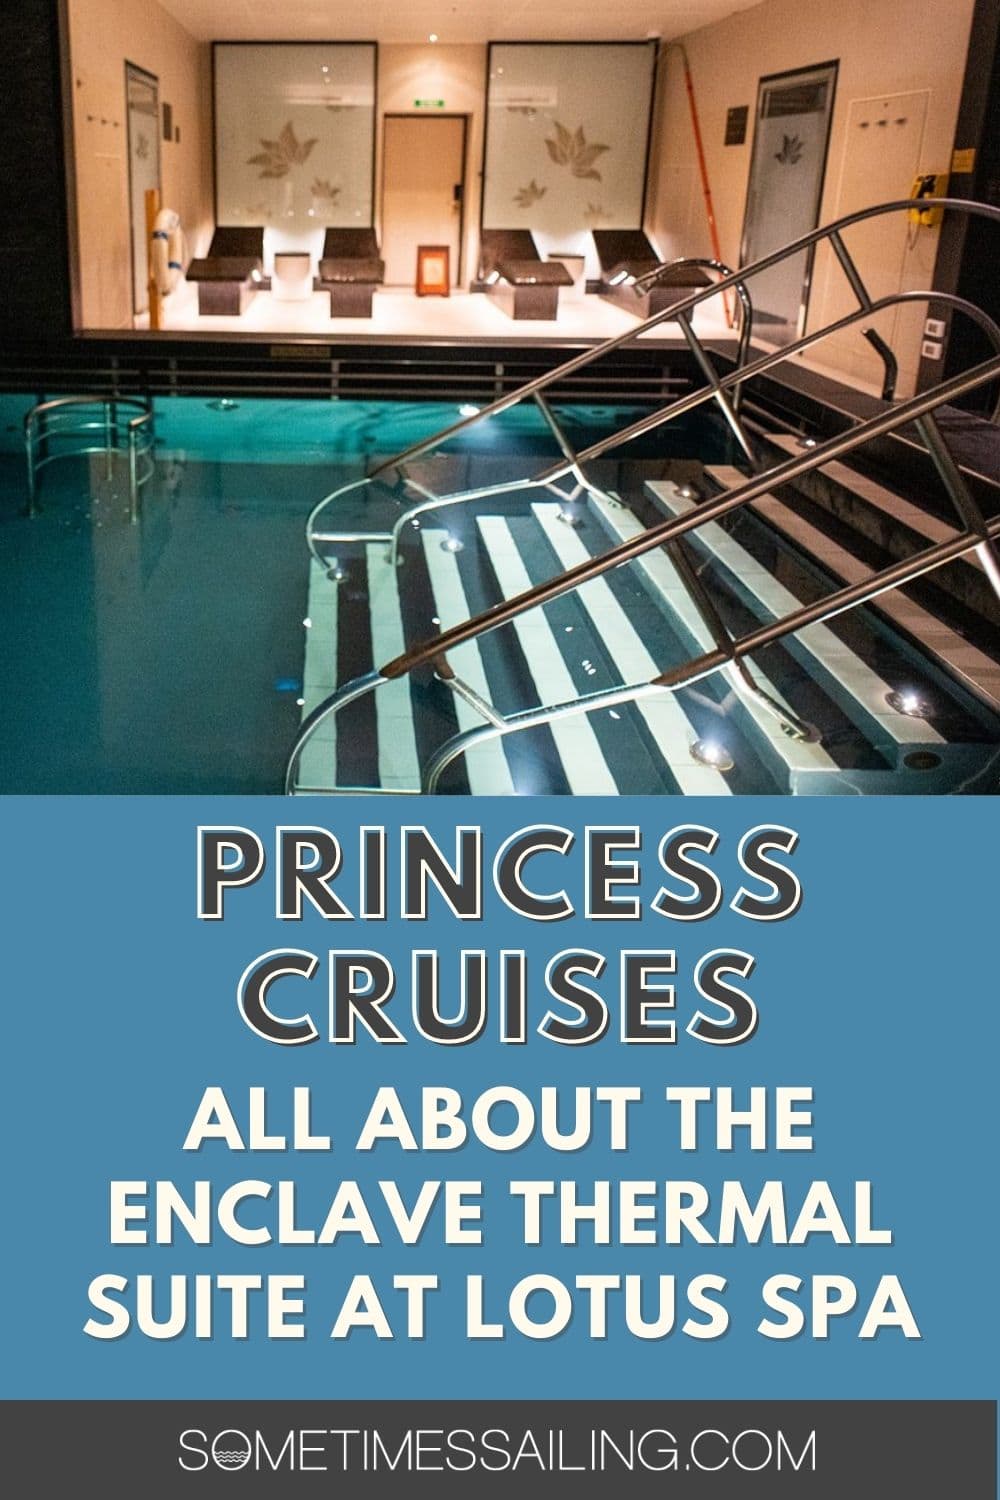 Princess Cruises: All about The Enclave Thermal Suite at Lotus Spa, with a photo of the blue thermal pool above the text.